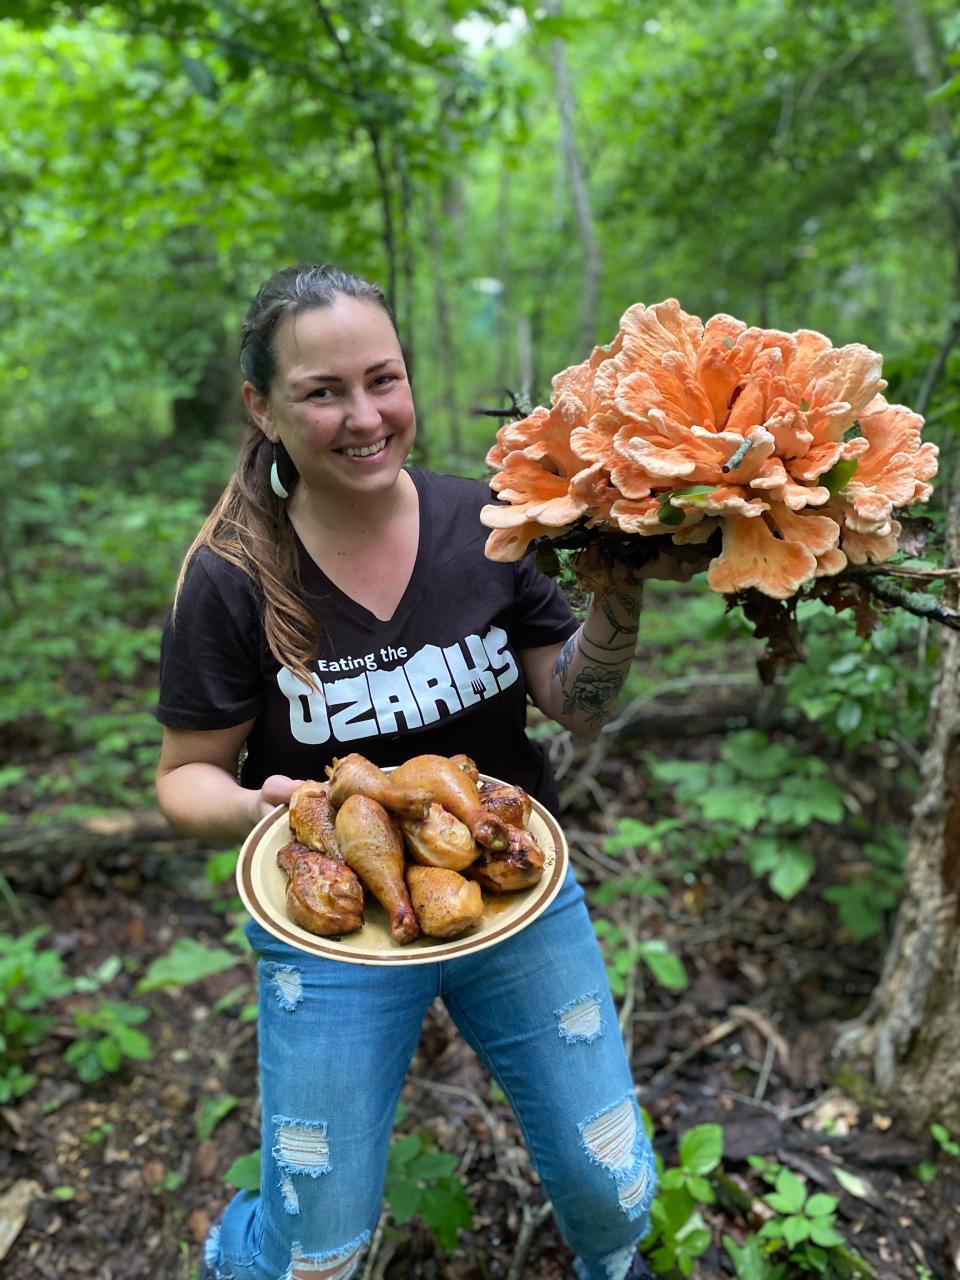 Rachael West is the founder of Eating the Ozarks, a local organization that offers group foraging classes, private classes at your location, wild-infused meals, special event catering, herbalist training, primitive skills campouts and foraging certifications.